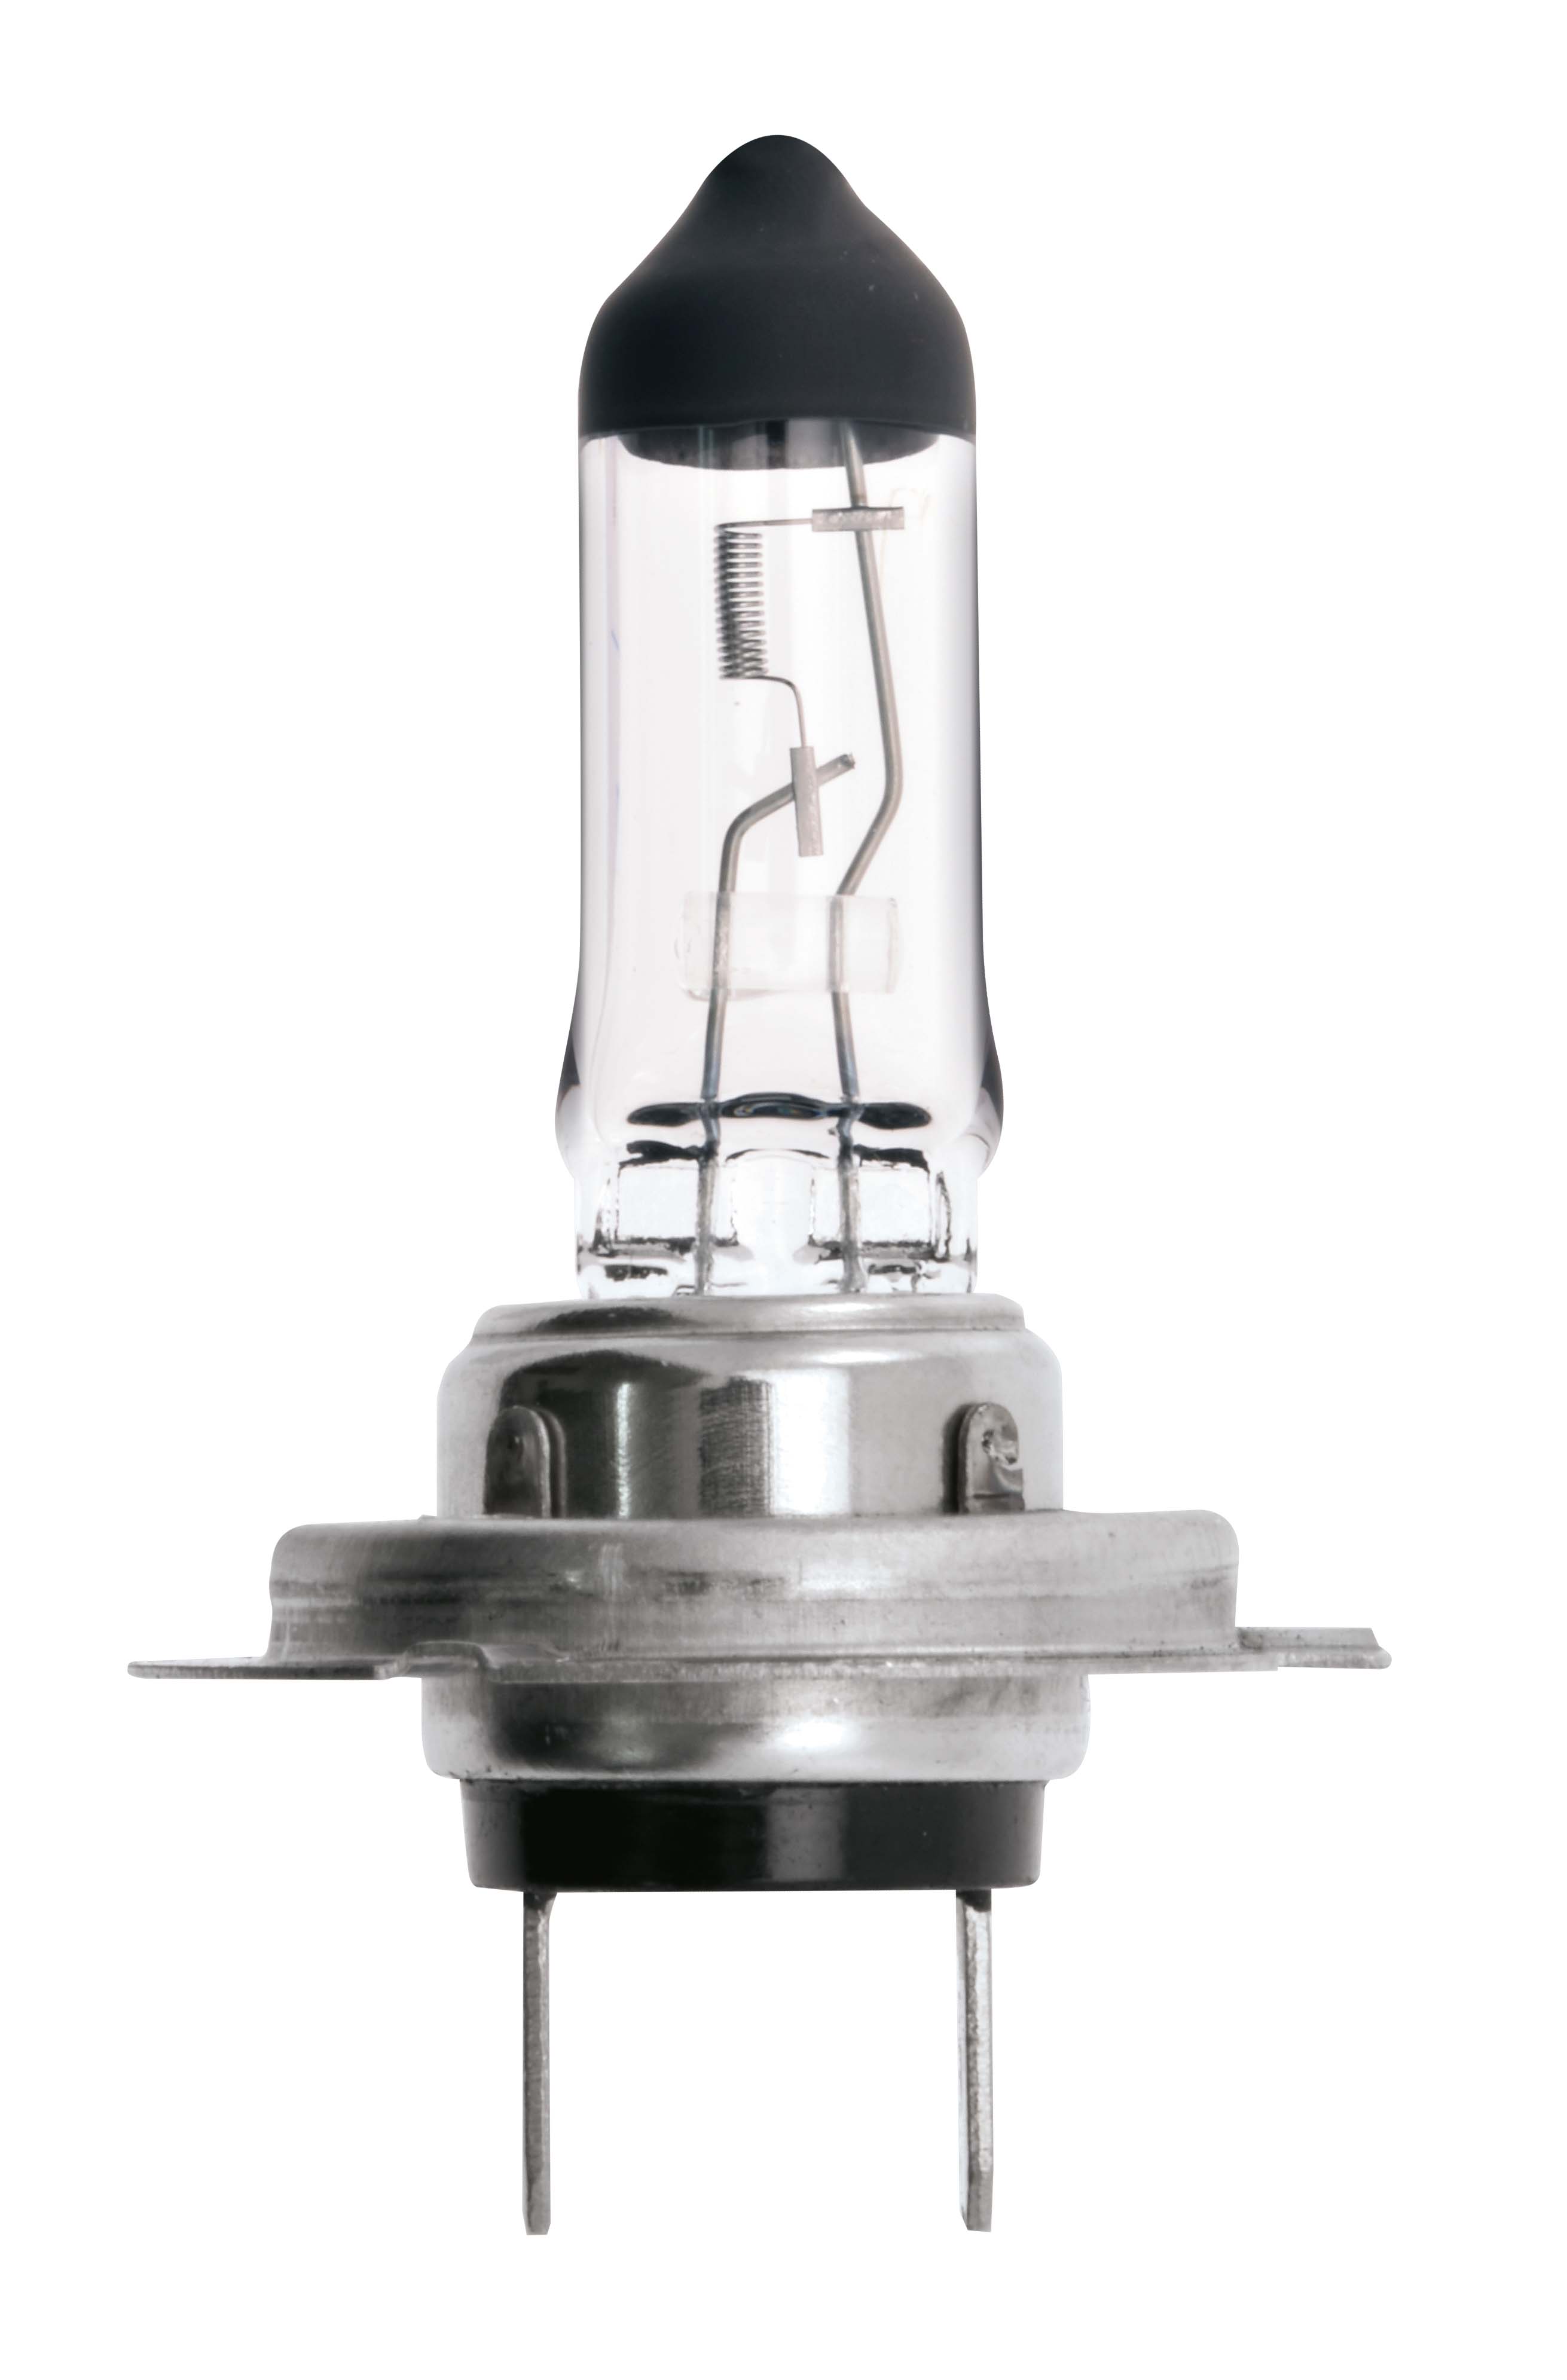 24v, 70w Halogen Bulb With A Px26d Base Main Image